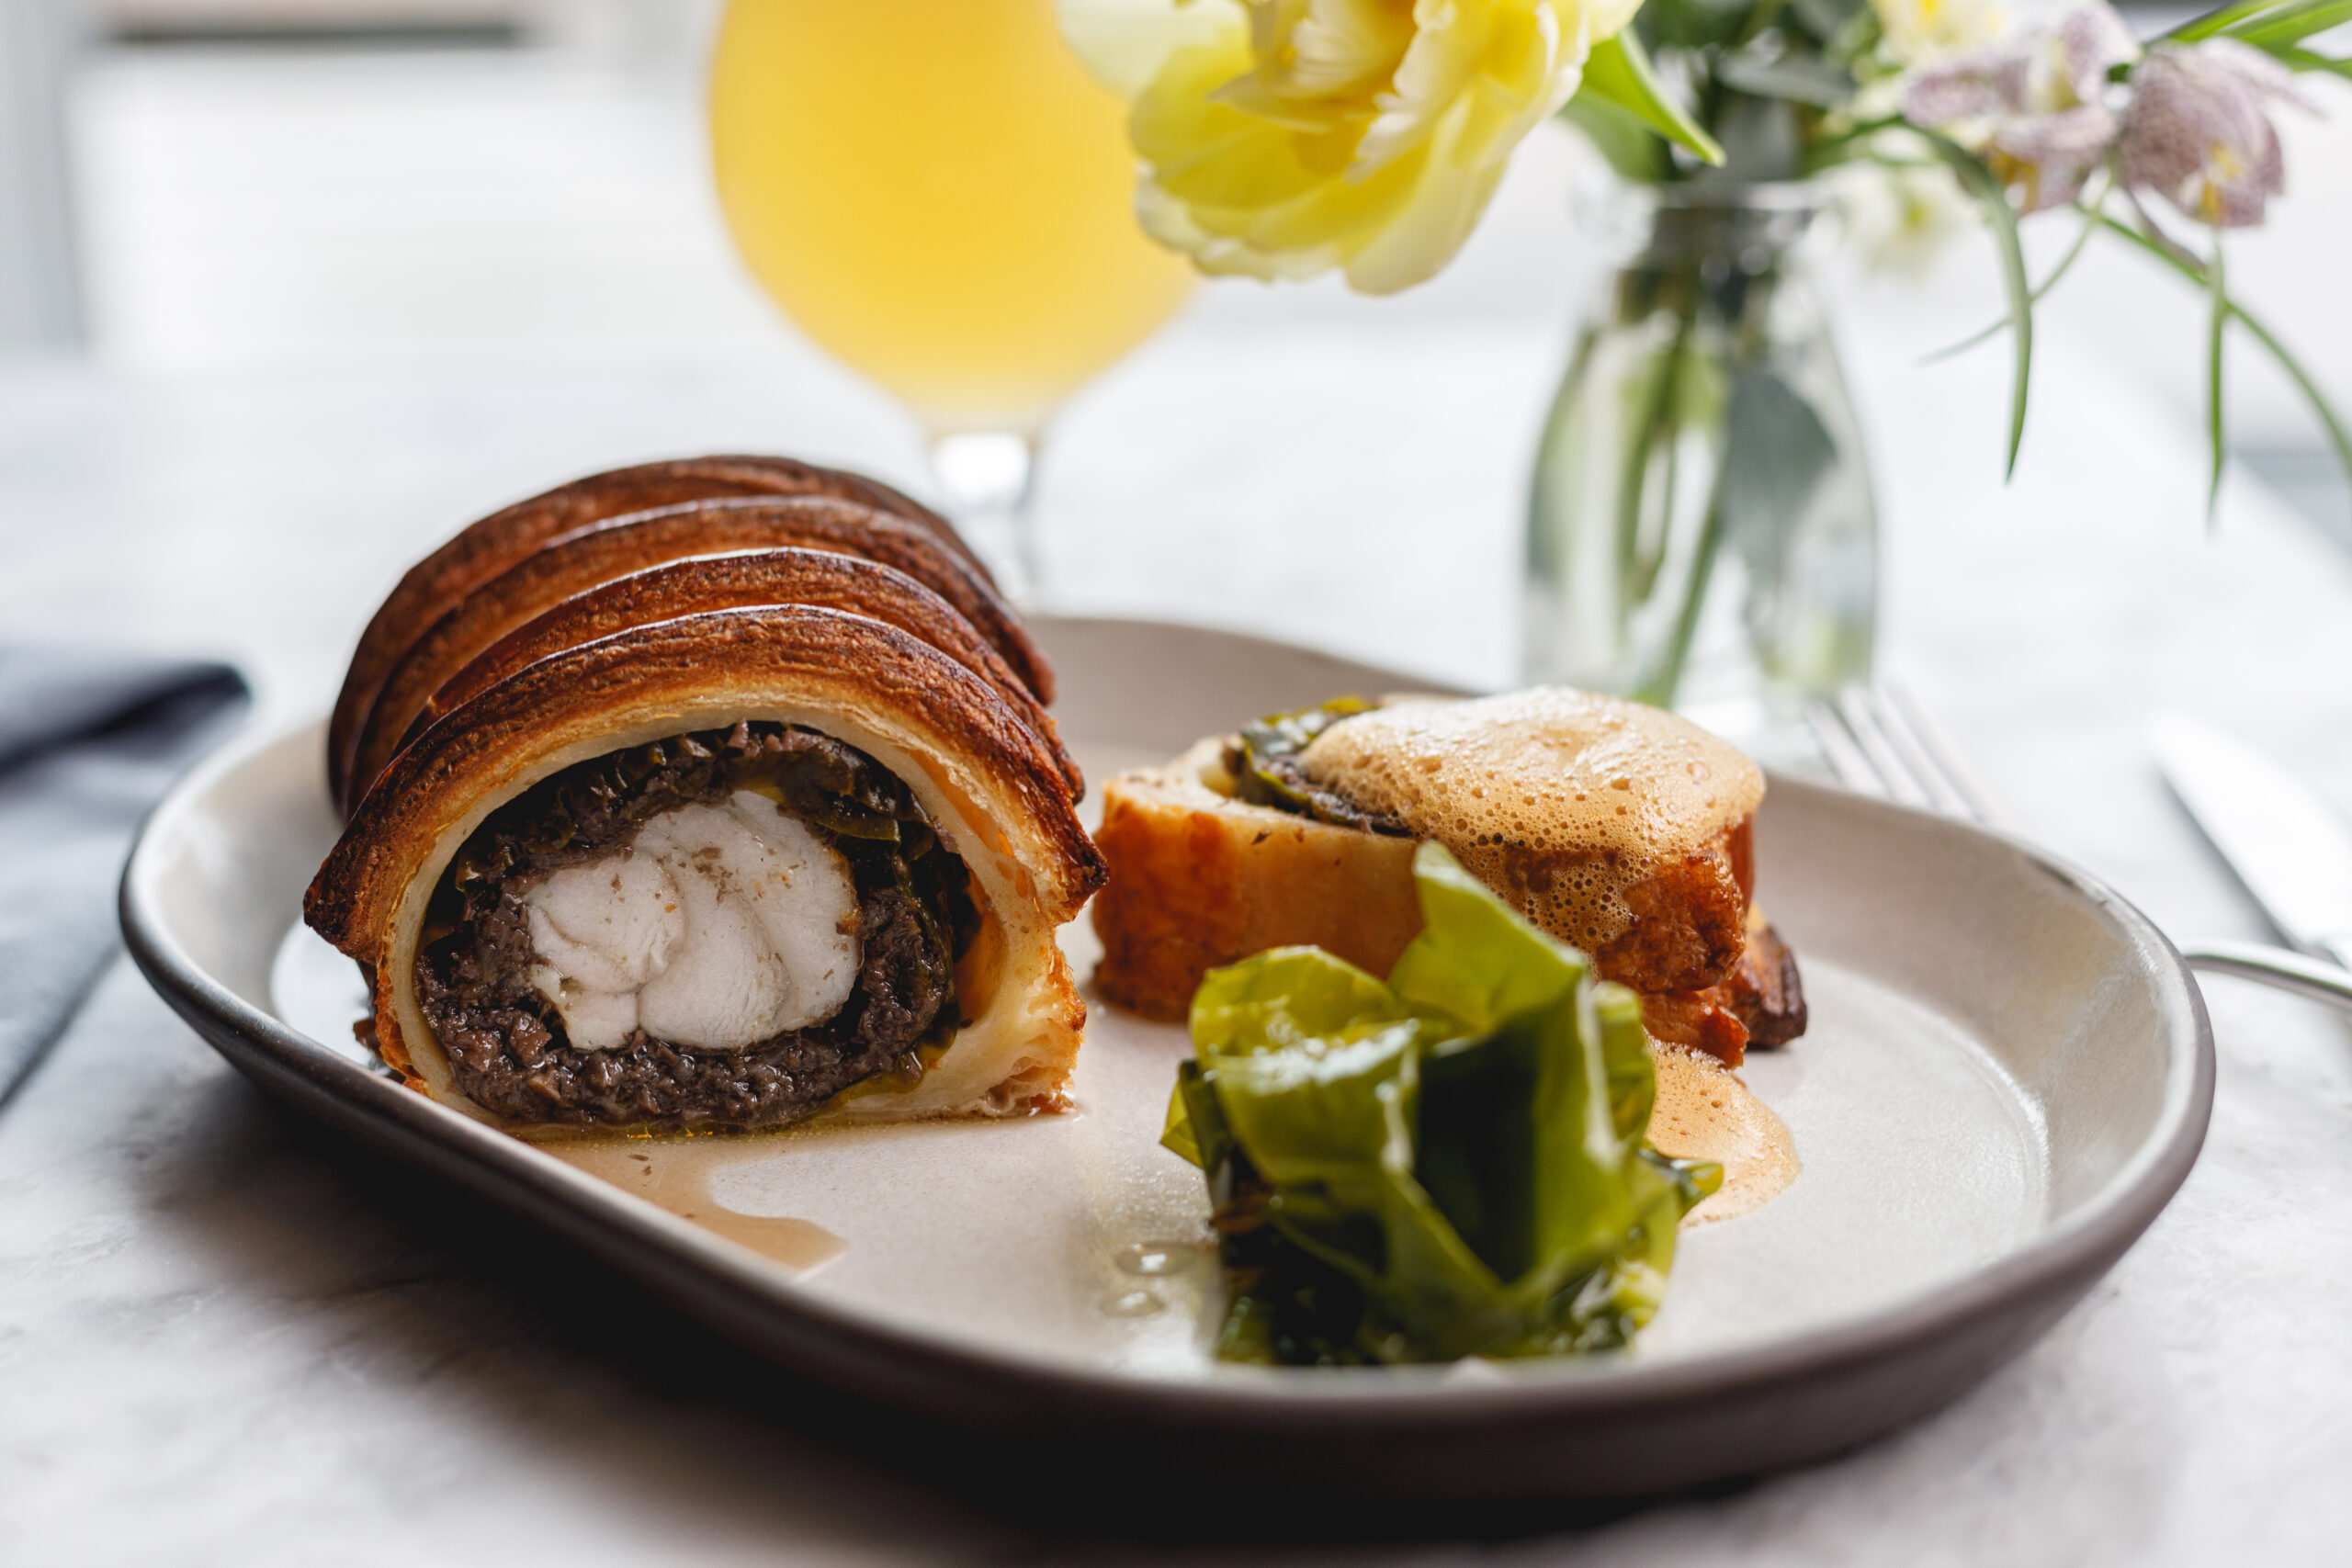 Monkfish Wellington wrapped in a puff pastry with pickled green sugar kelp on the side on a white plate.